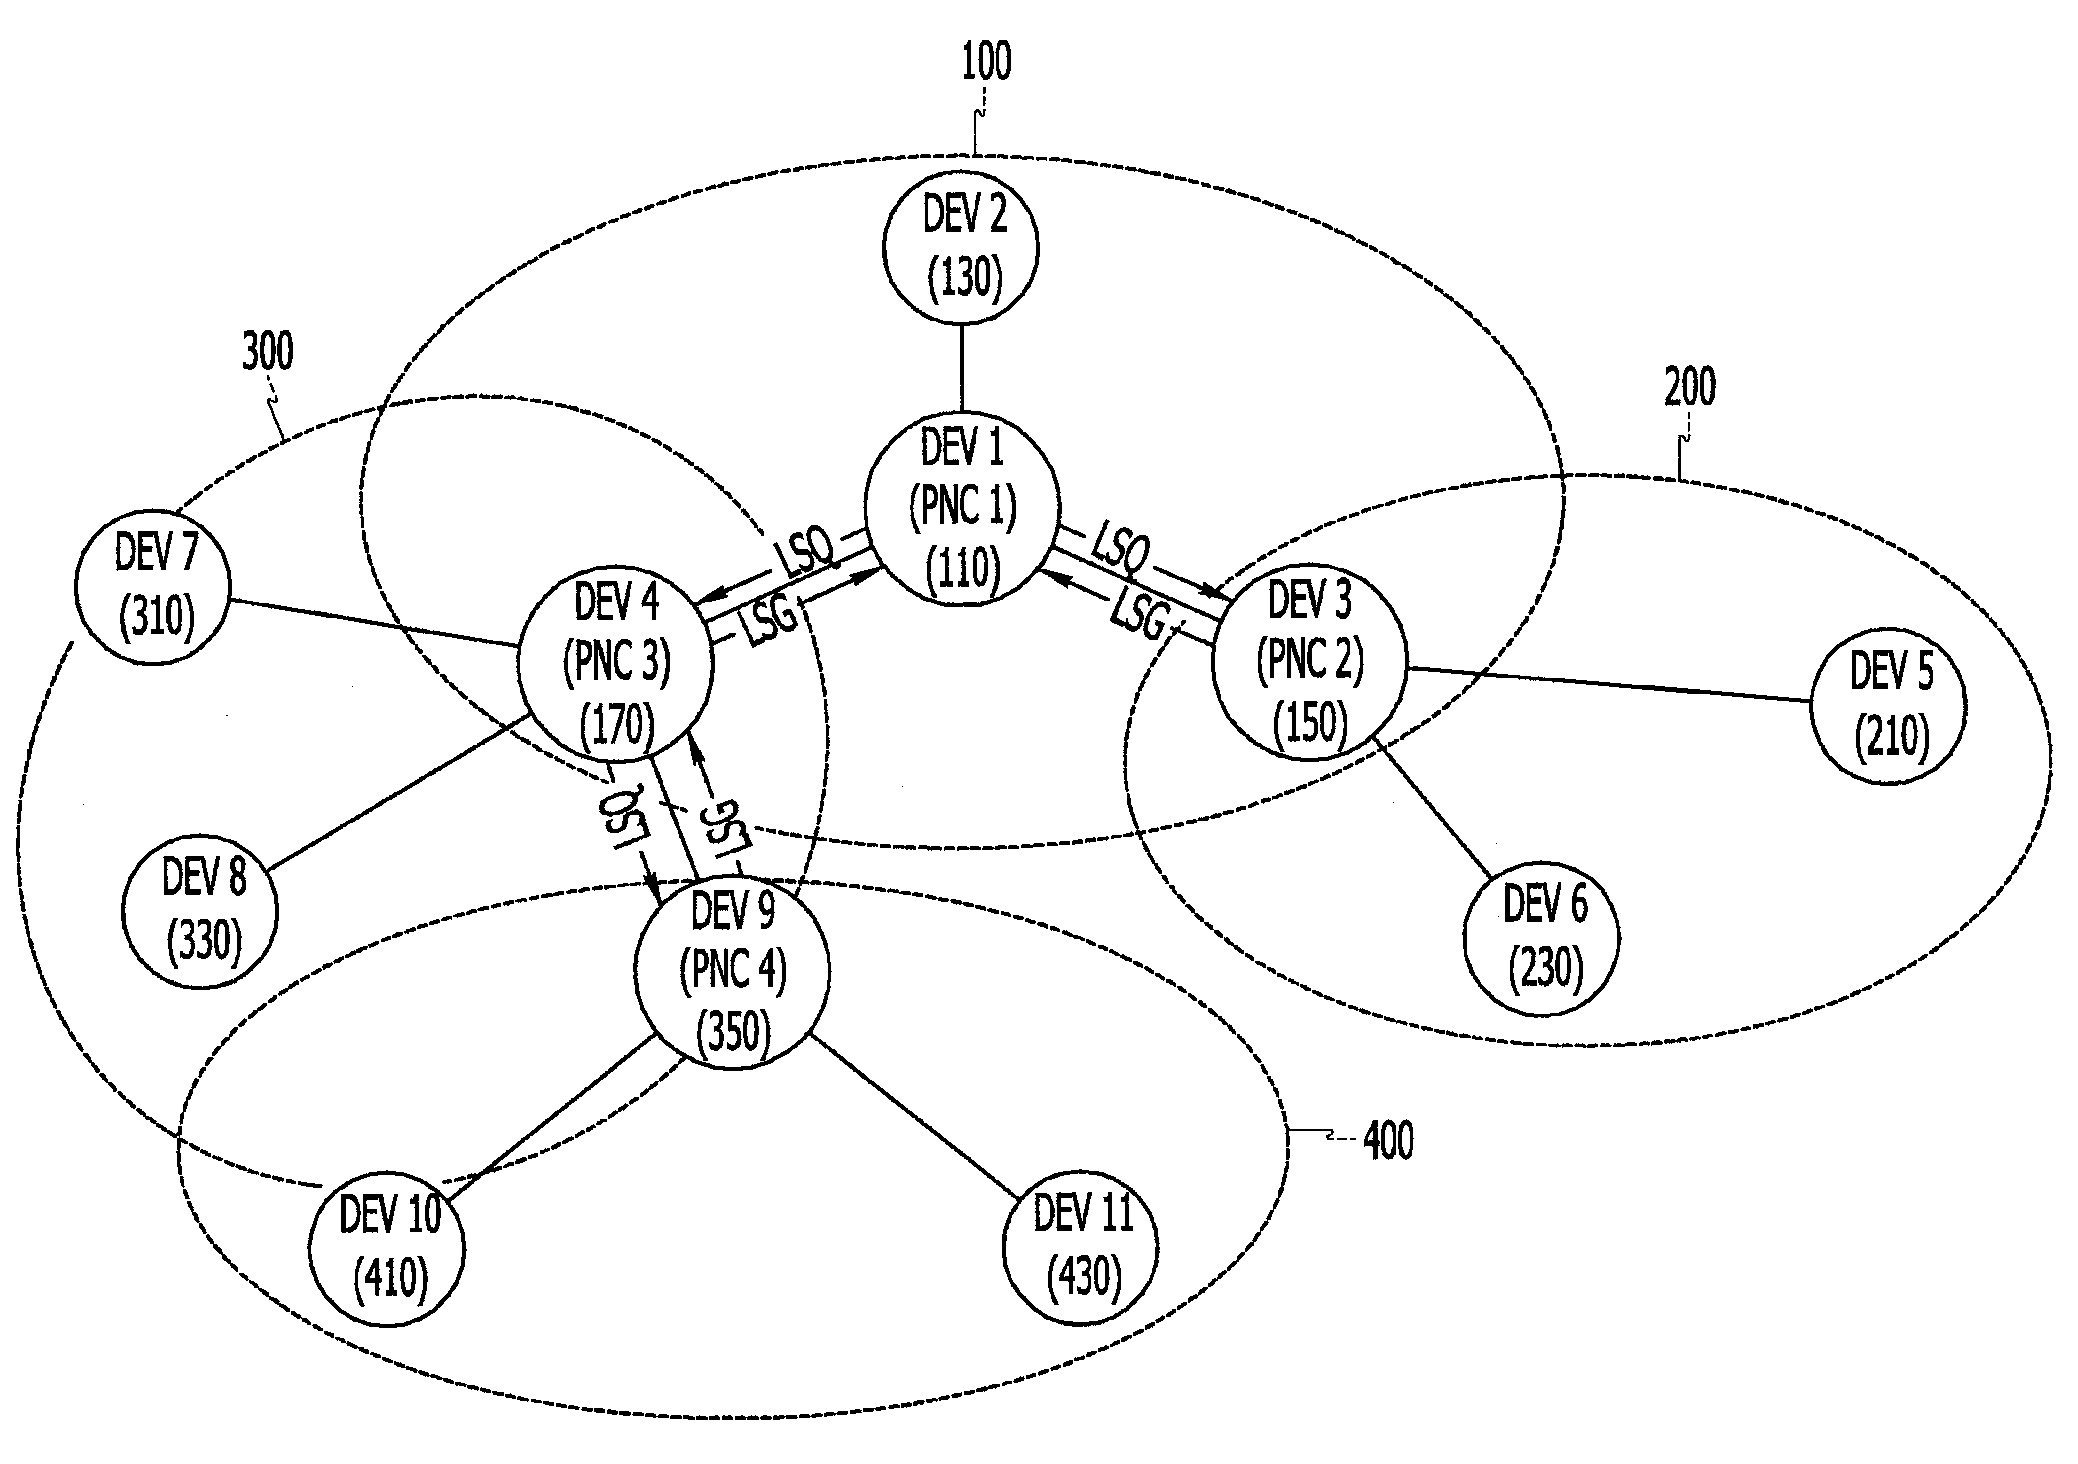 Routing table generation, data transmission and routing route formation method for multi-hop services in high rate wireless personal networks